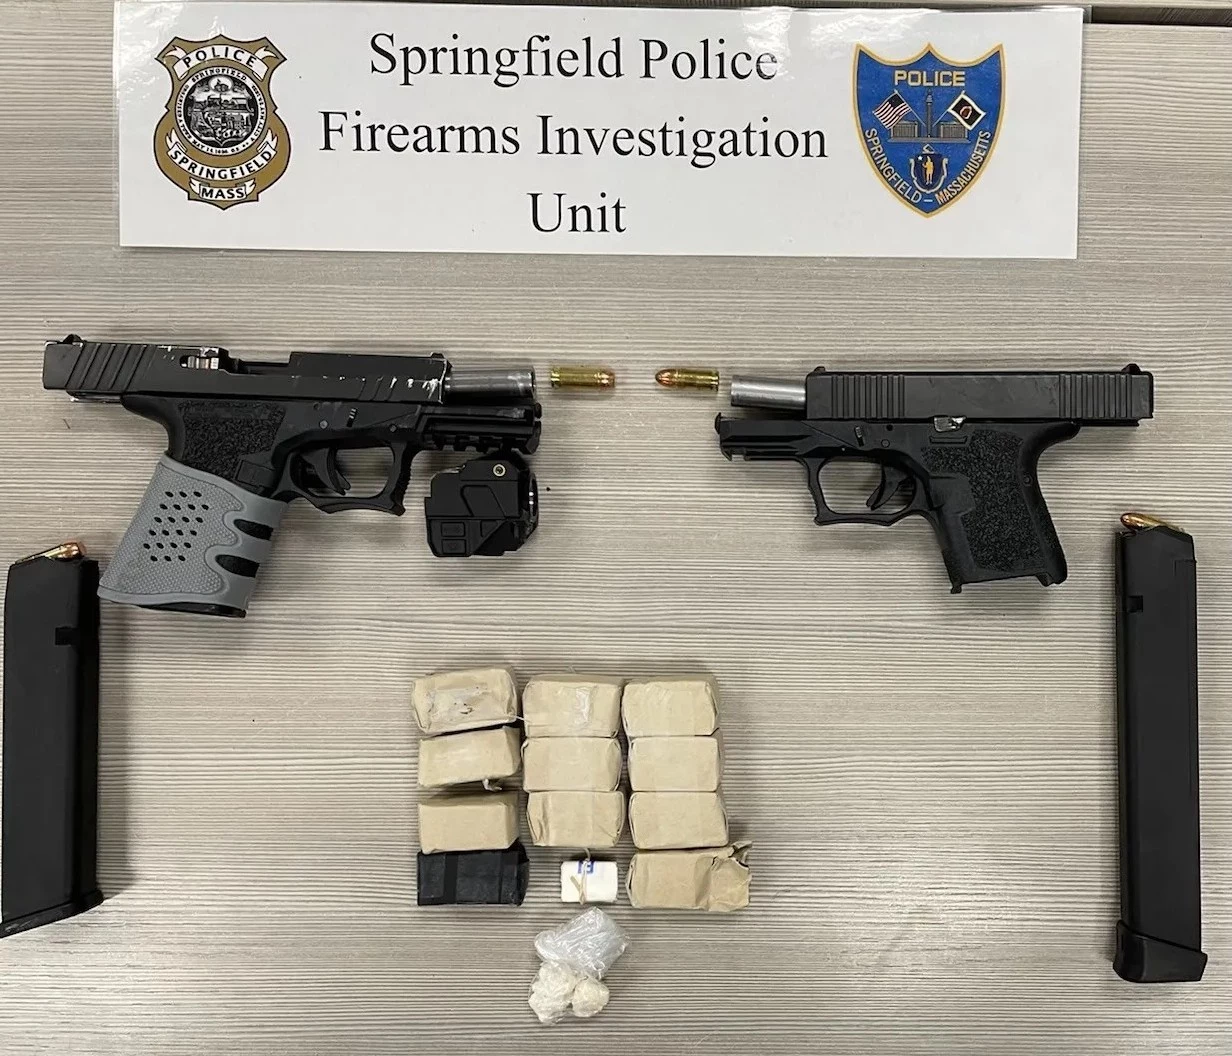 Western MA Police Seize Ghost Guns and Drugs During Traffic Stop